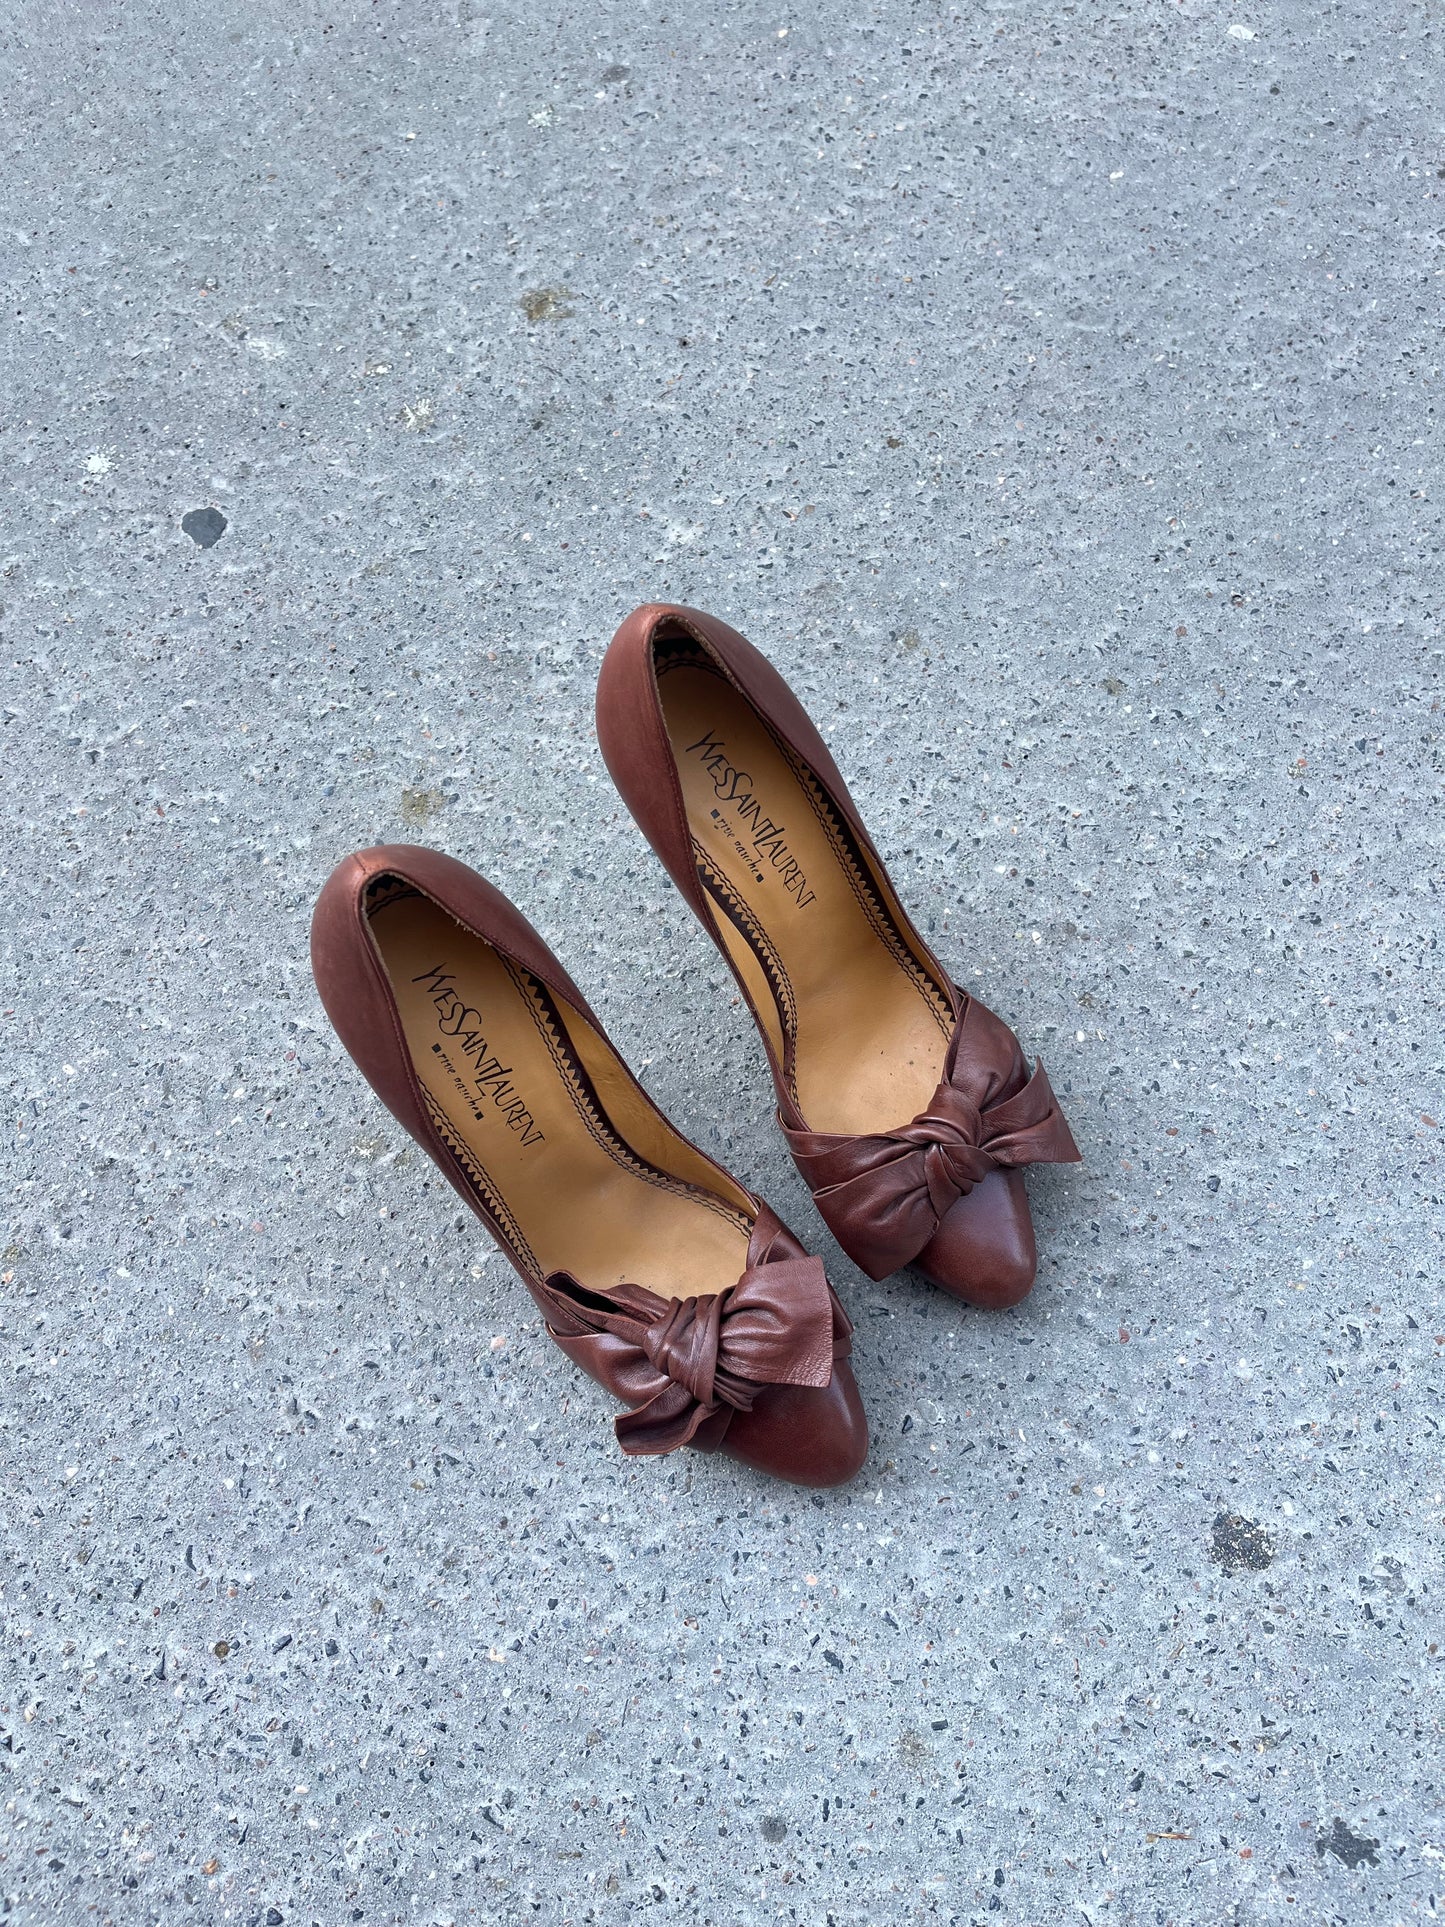 YVES SAINT LAURENT HEELS WITH BOW